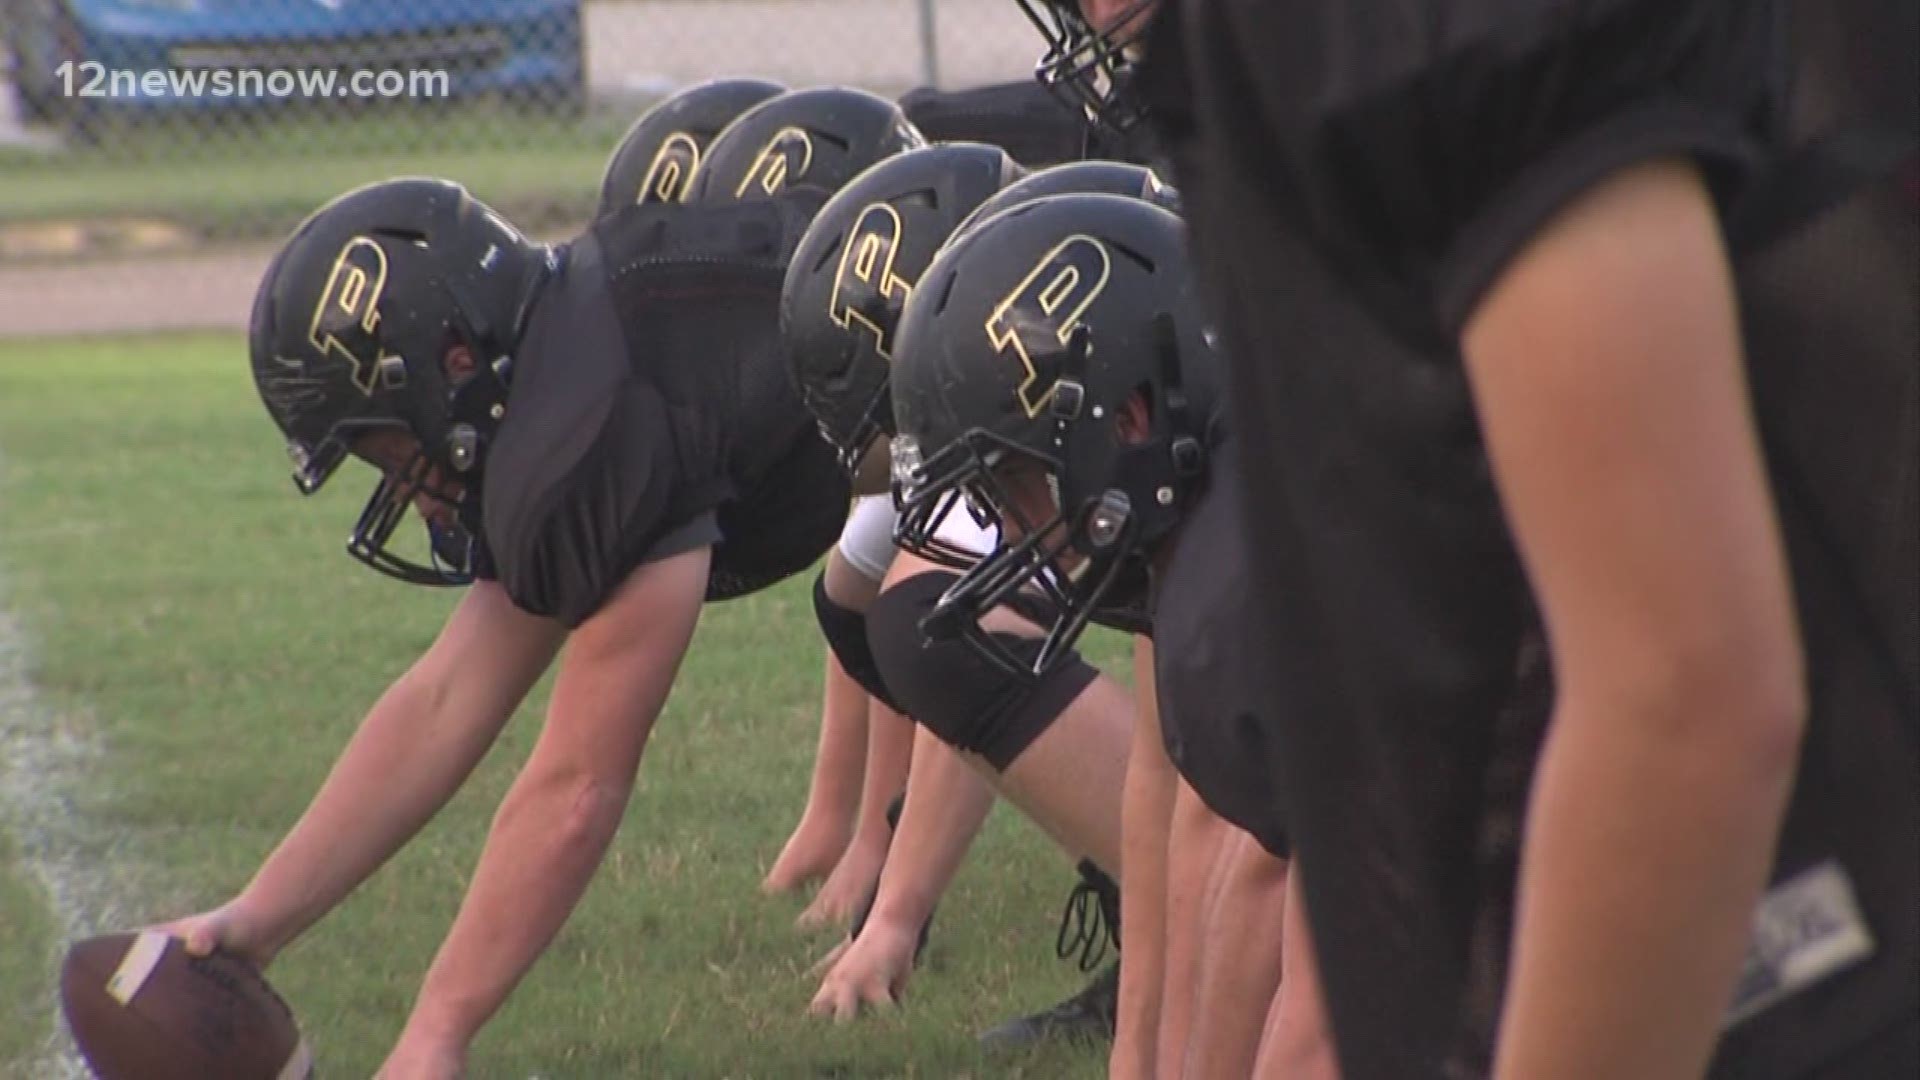 Vidor's going to win a majority of its games in the trenches this season. The defensive front seven and offensive line hope they can keep forcing their will on opponents.